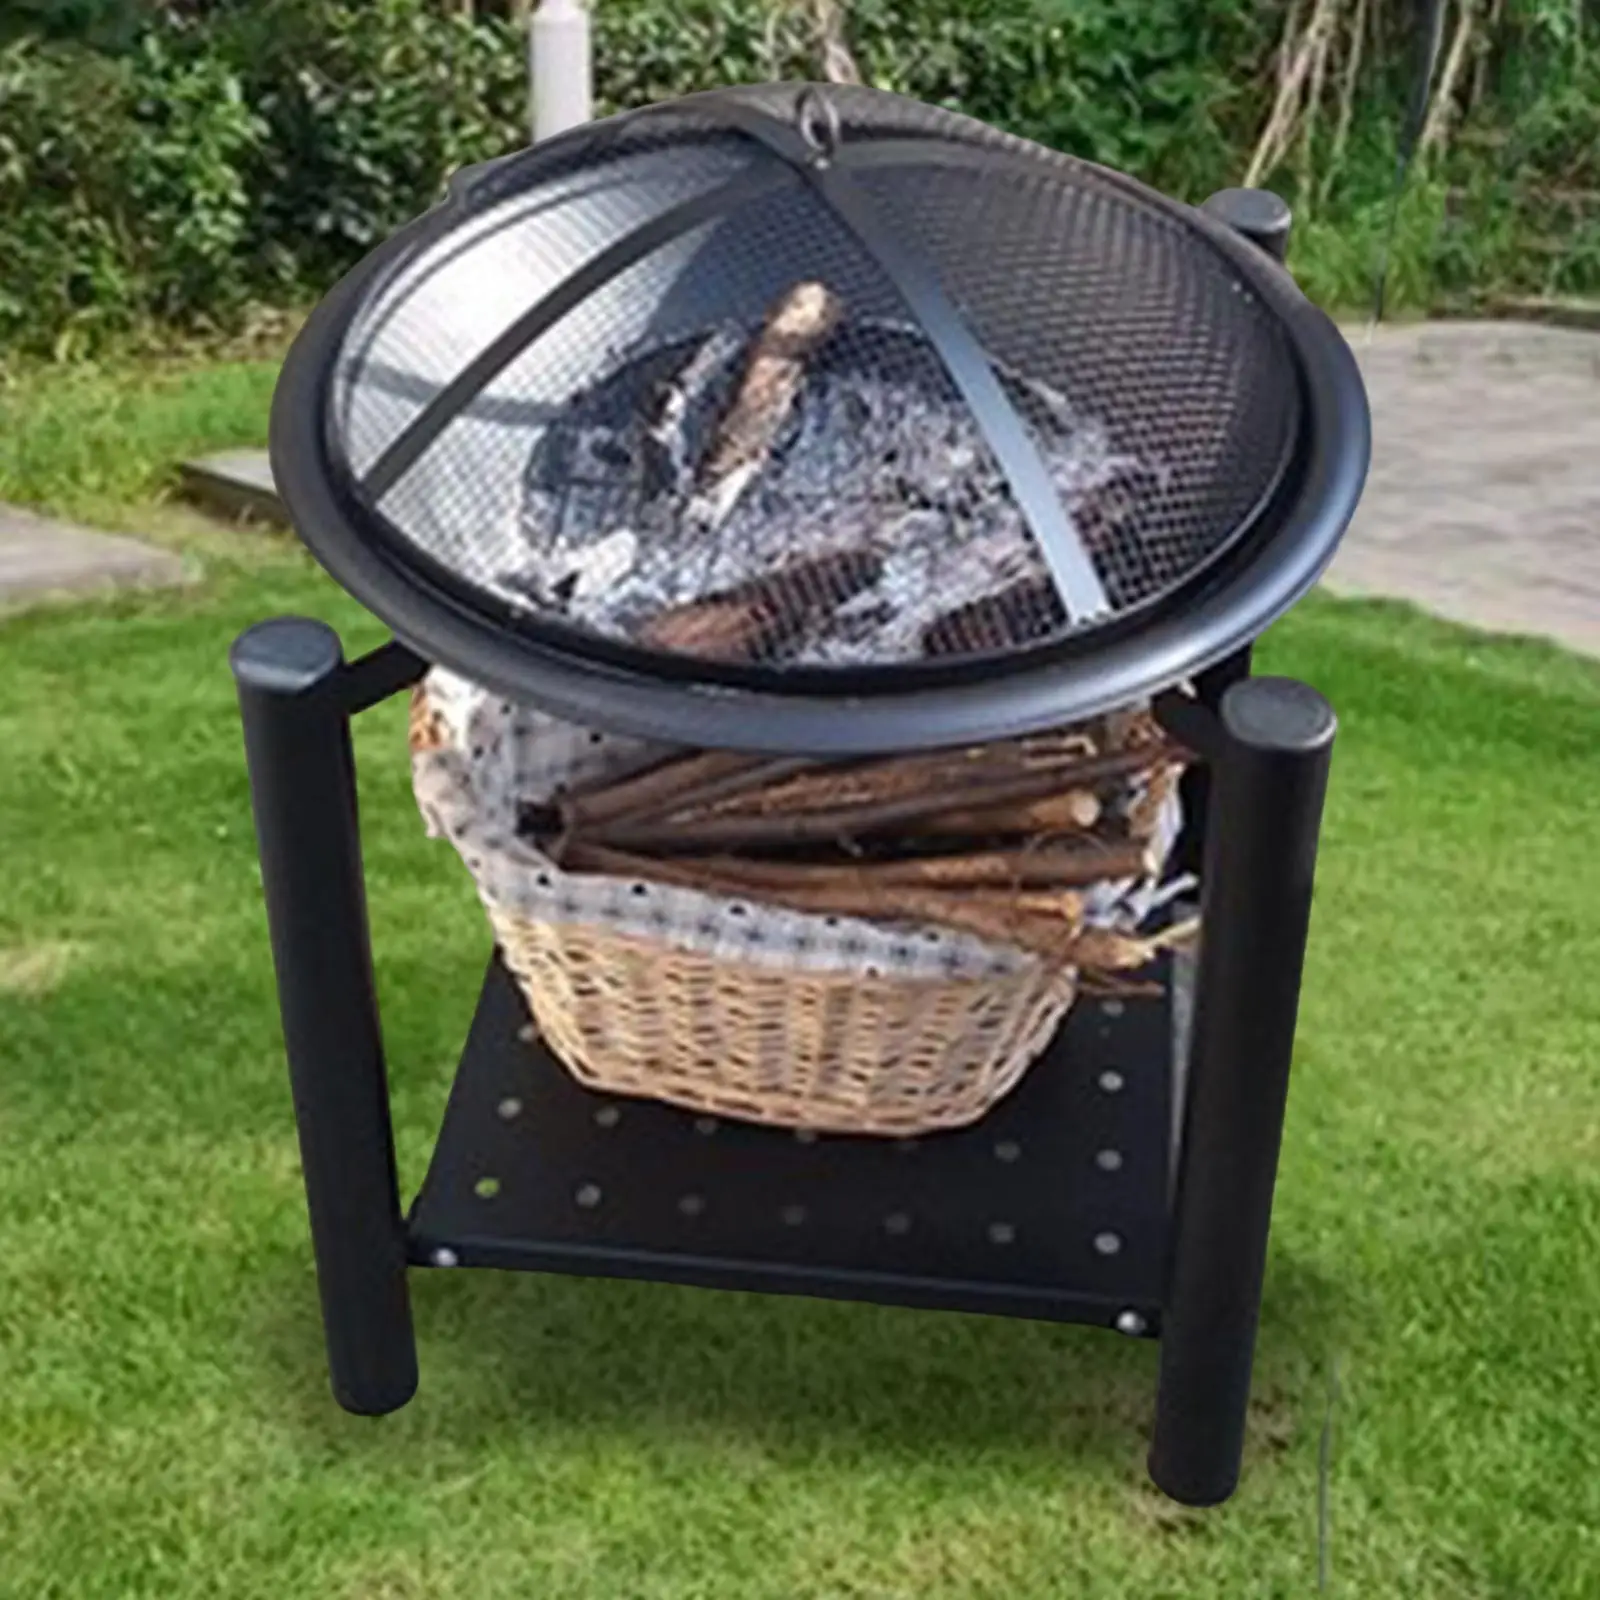 Fire Pit with Mesh Spark Screen Wood Burning Easy to Assemble with Grill with Storage Compartment for Wood Heater for Barbecue